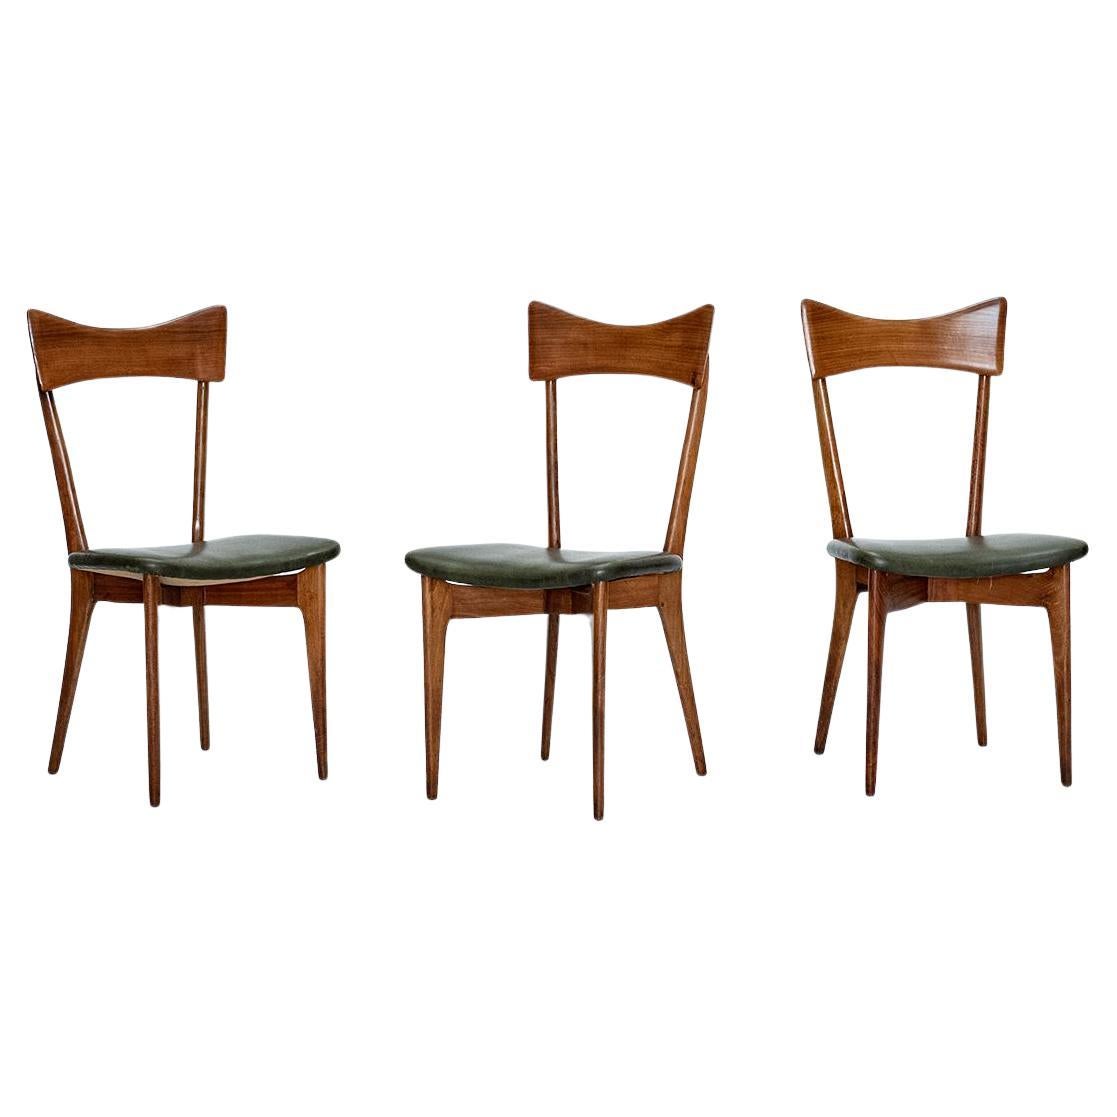 Italian Dining Chairs by Ico Parisi and Luisa Parisi for Ariberto Colombo, 1950s For Sale